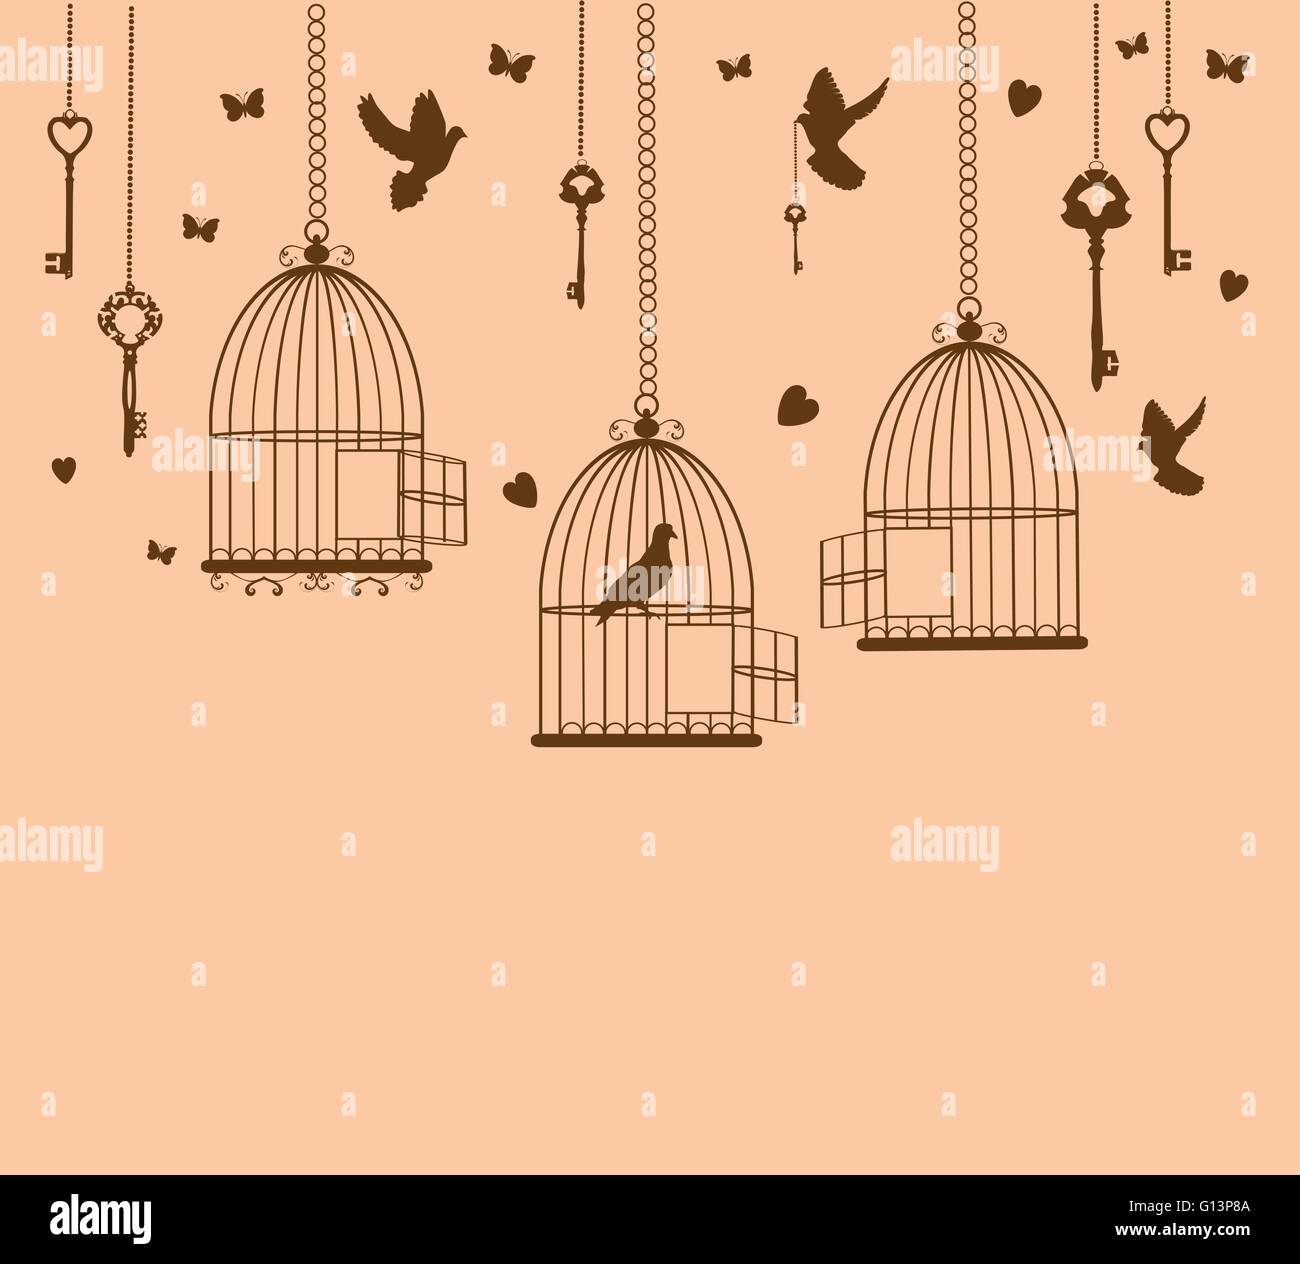 vector illustration of vintage card with birds and cages Stock Vector